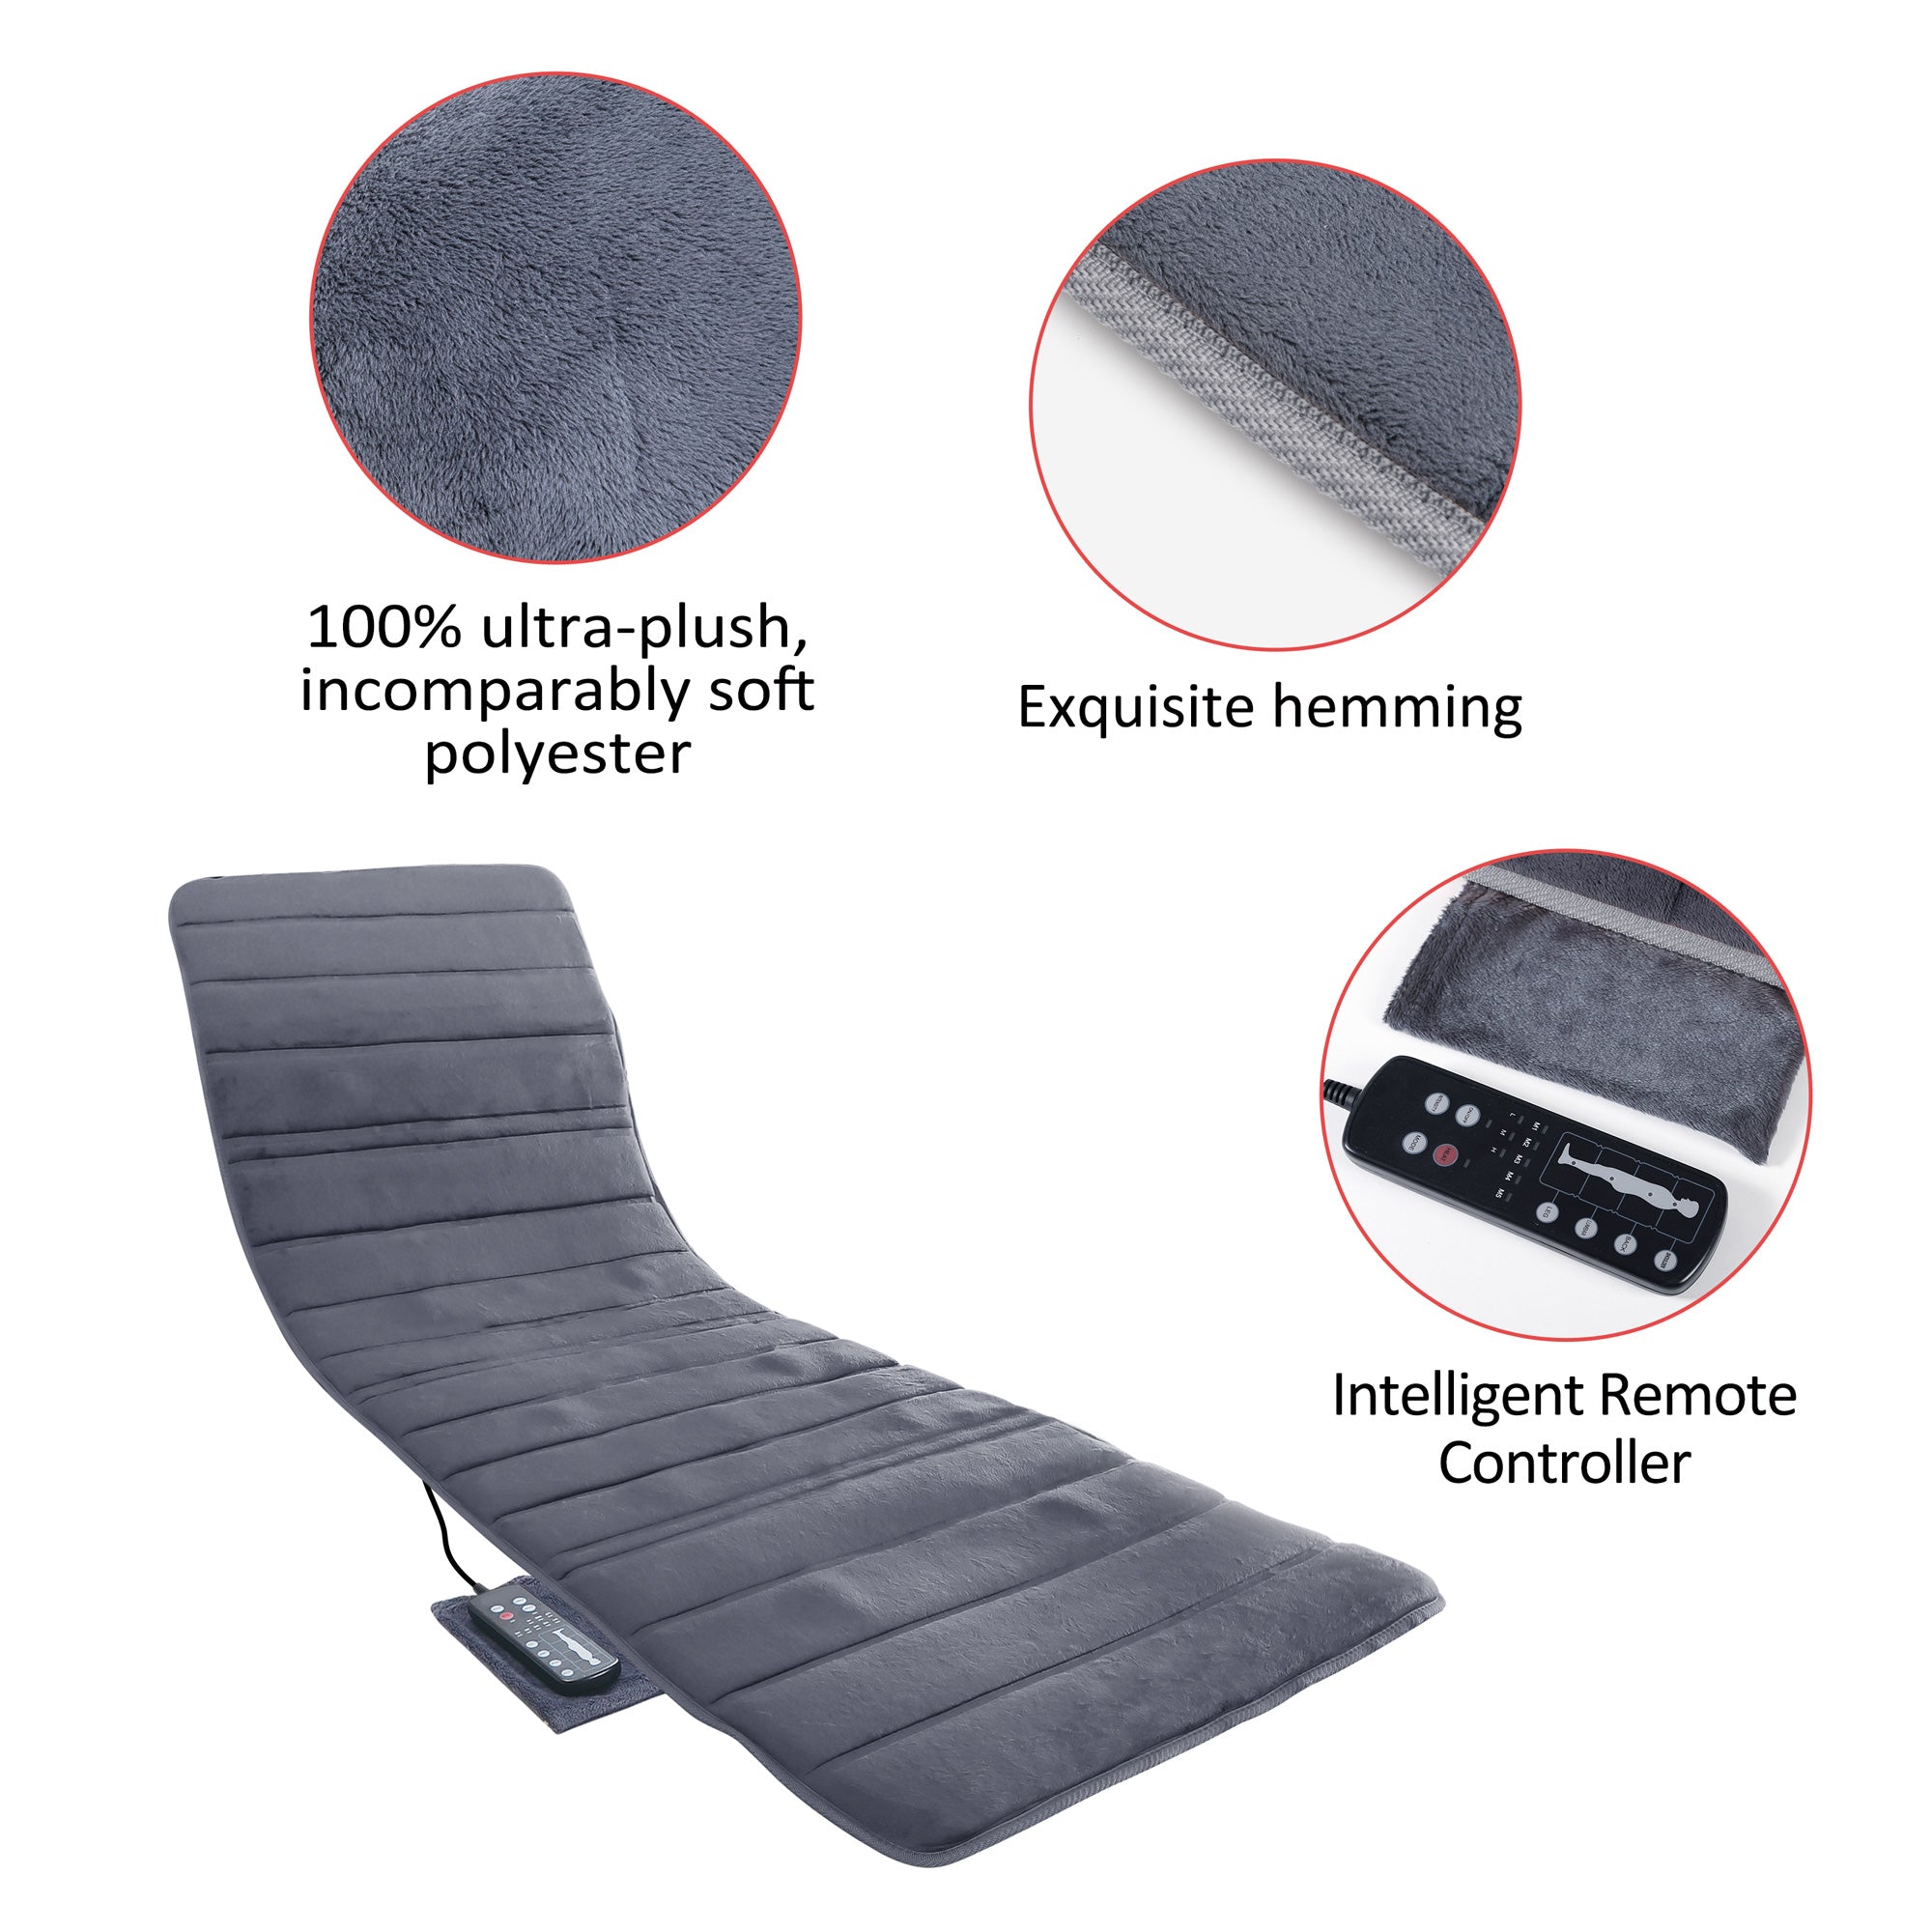 Comfier Full Body Massage Mat With Heat And Vibration Motors And 2 Therapy 7676